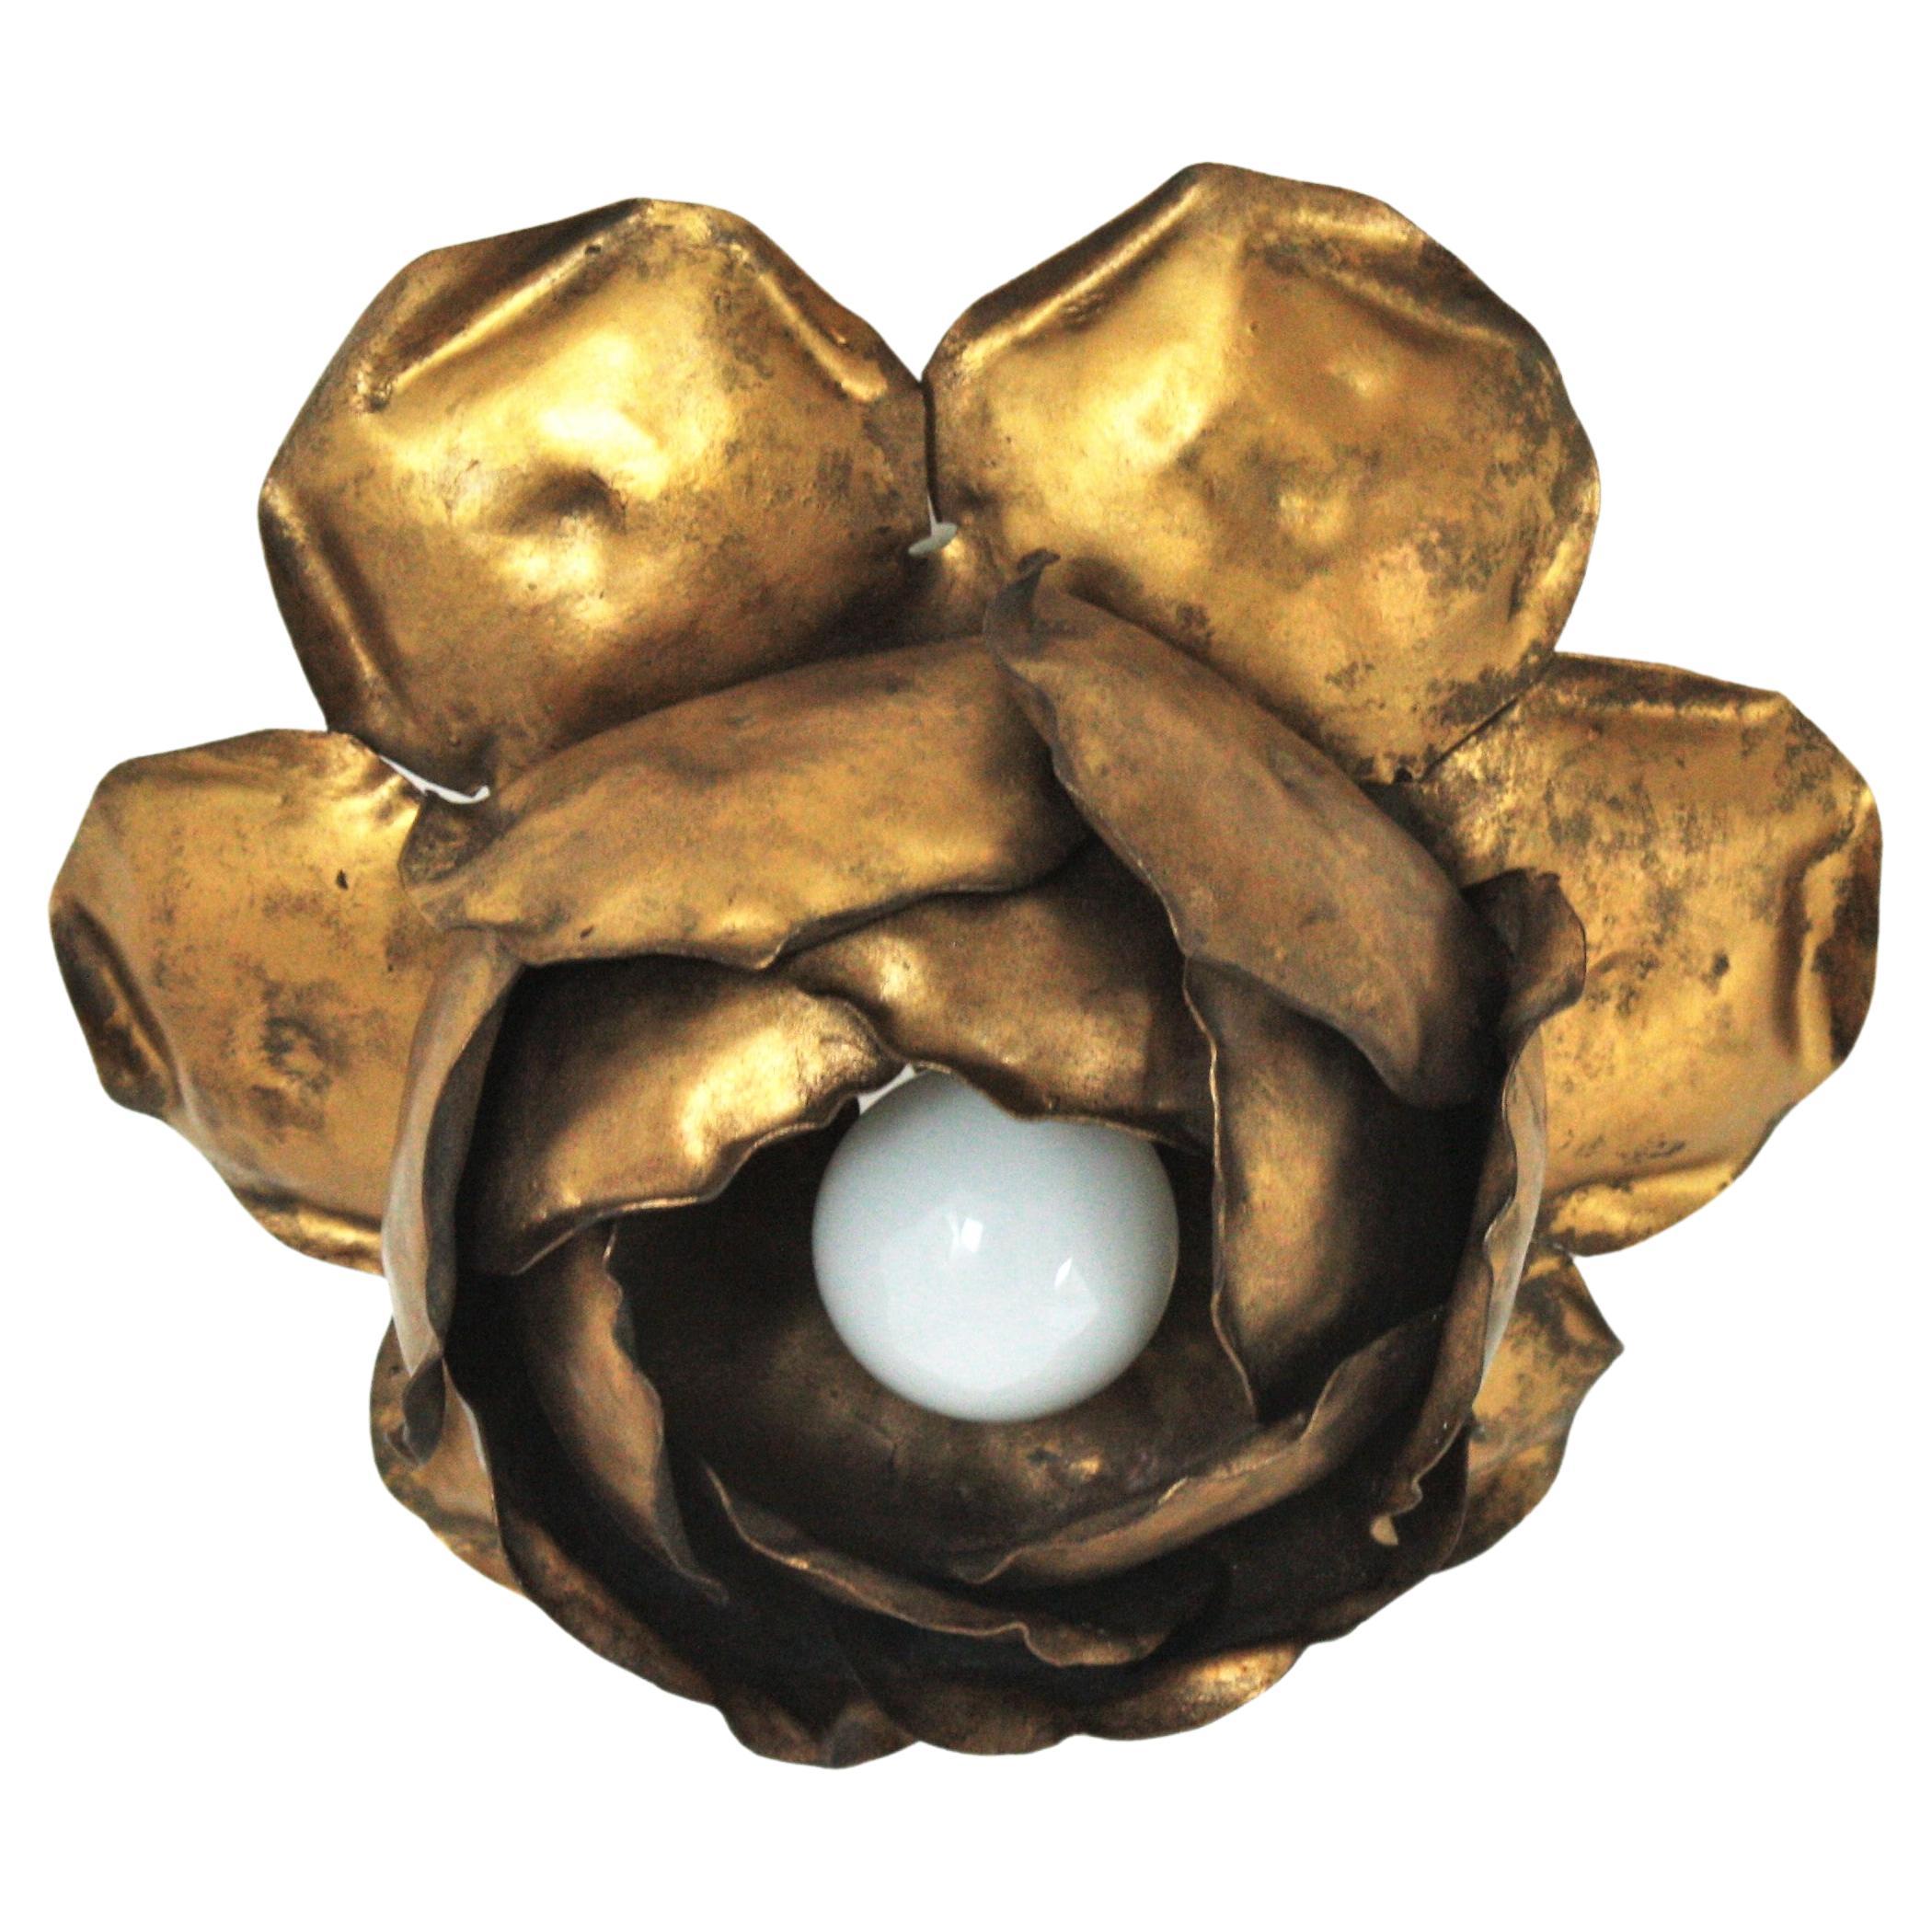 Flower shaped flush mount, gold leaf, gilt iron. Spain, 1950s.
Eye-catching ceiling light fixture in the shape of a peony flower bud.
This hand- wrought iron ceiling light fixture is nicely constructed, with leaves surrounding the central light. It